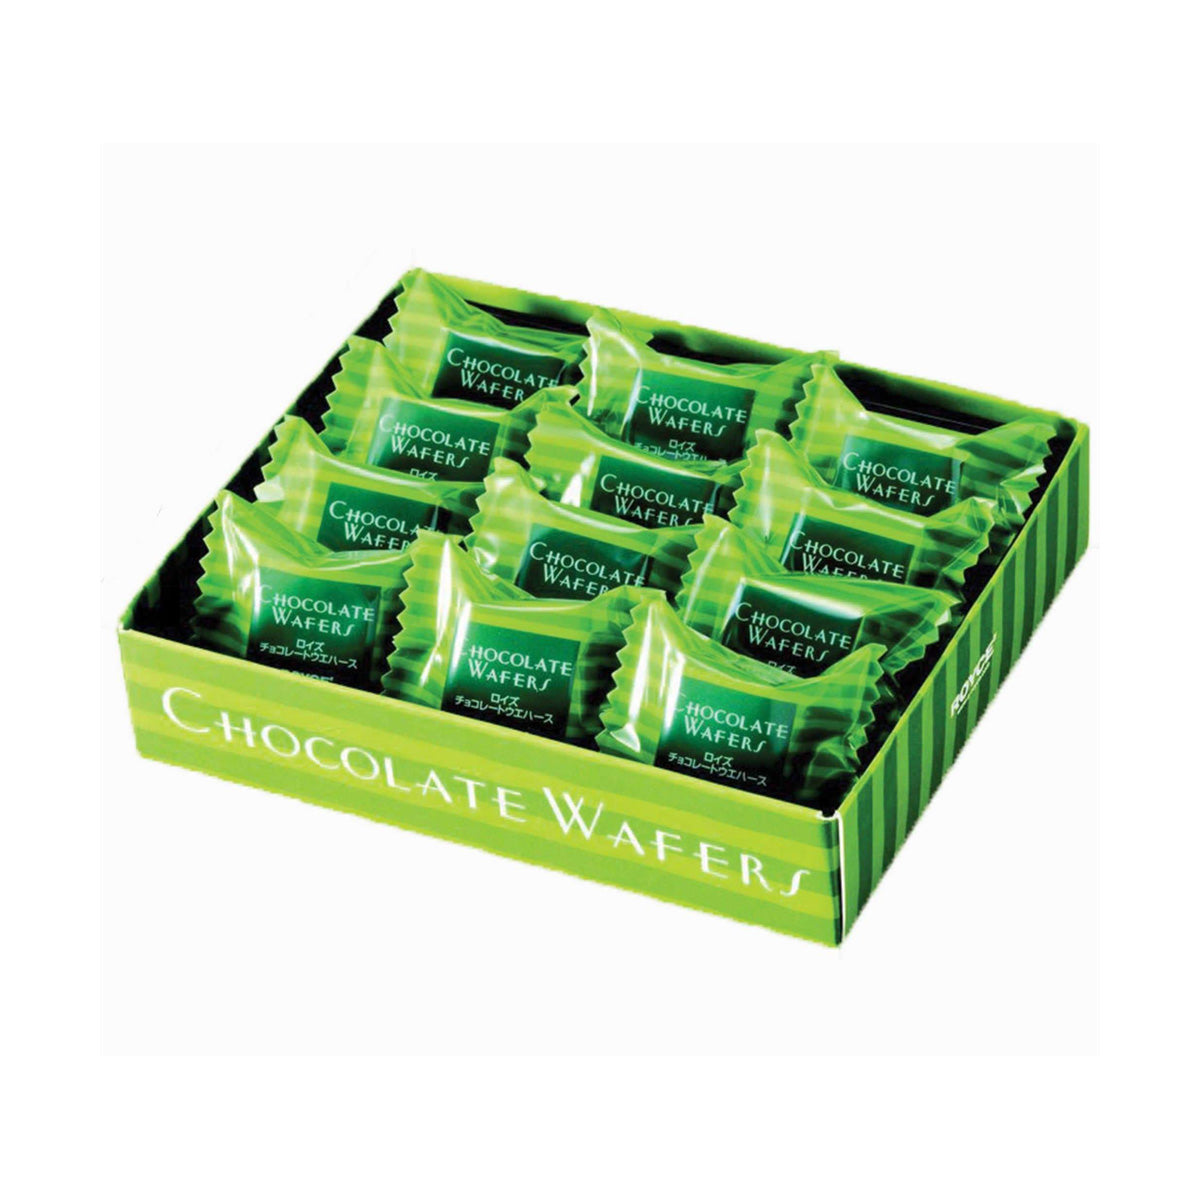 ROYCE' Chocolate - Chocolate Wafers "Matcha" -  Image shows a green box filled with individually-wrapped wafers with green striped wrapper. White text on each says Chocolate Wafers ROYCE'. White text on the bottom part says Chocolate Wafers.